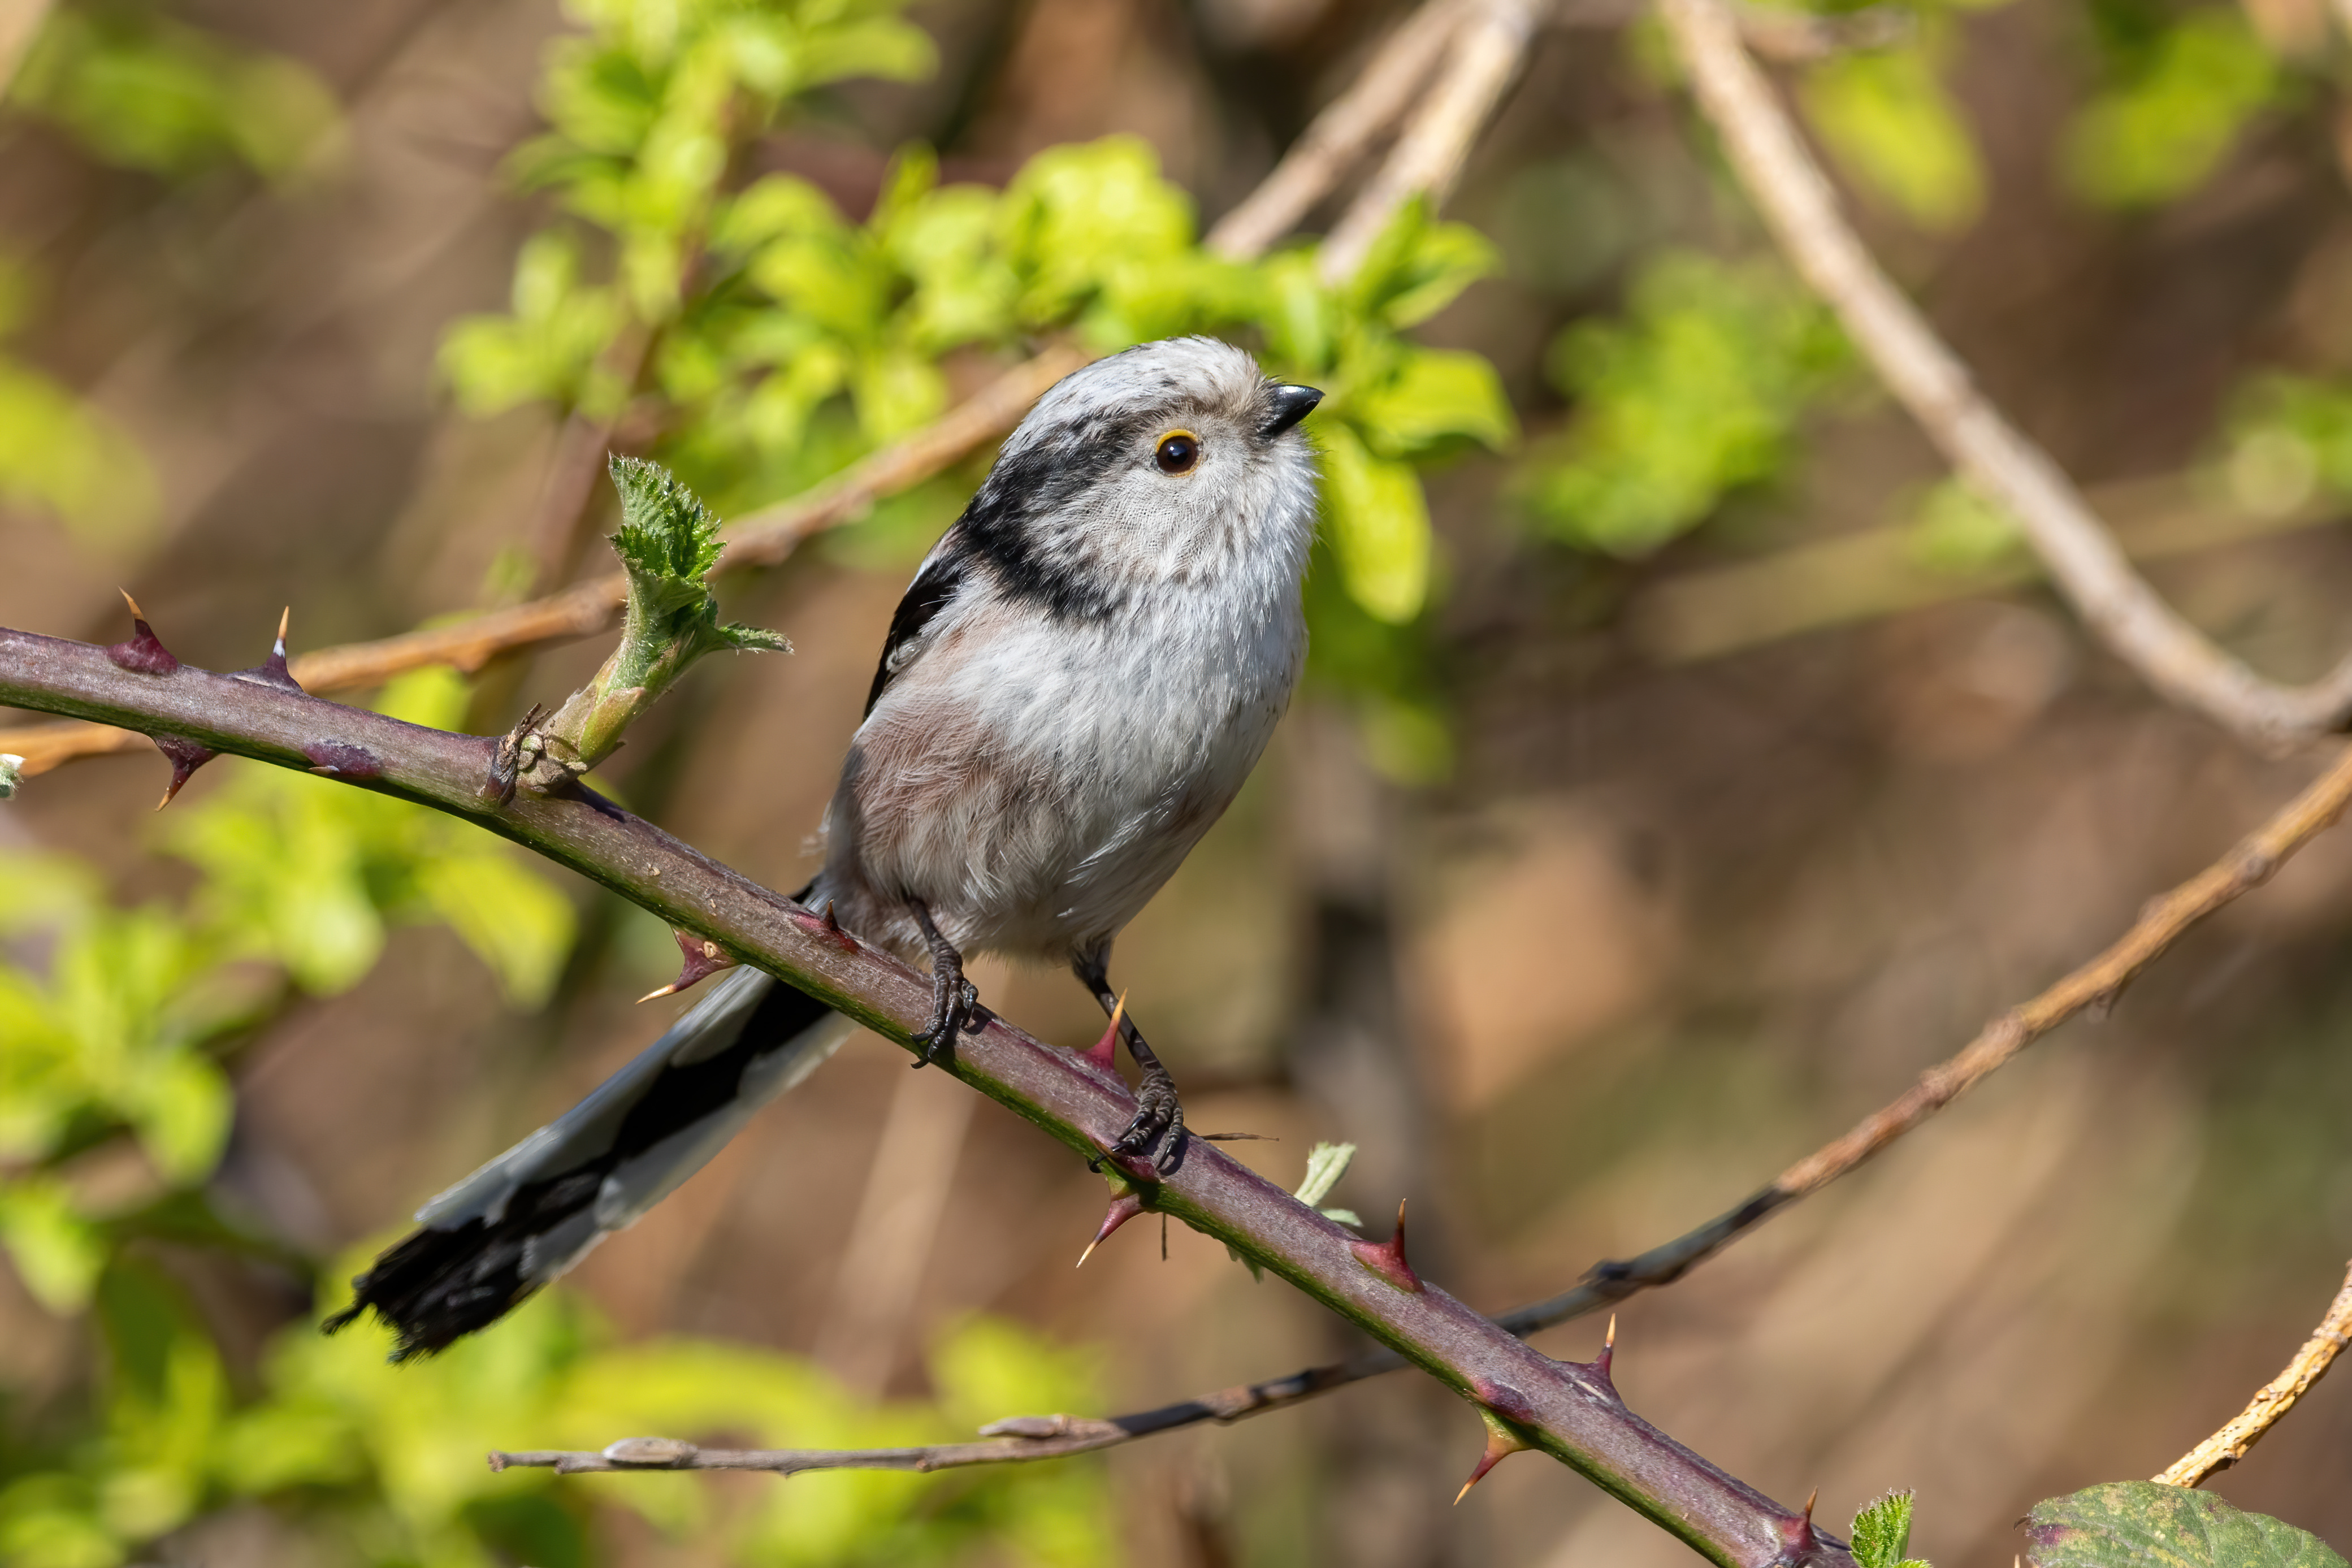 Long-tailed tit (Aegithalos caudatus) perched on brambles in Gennevilliers, France by Alexis Lours